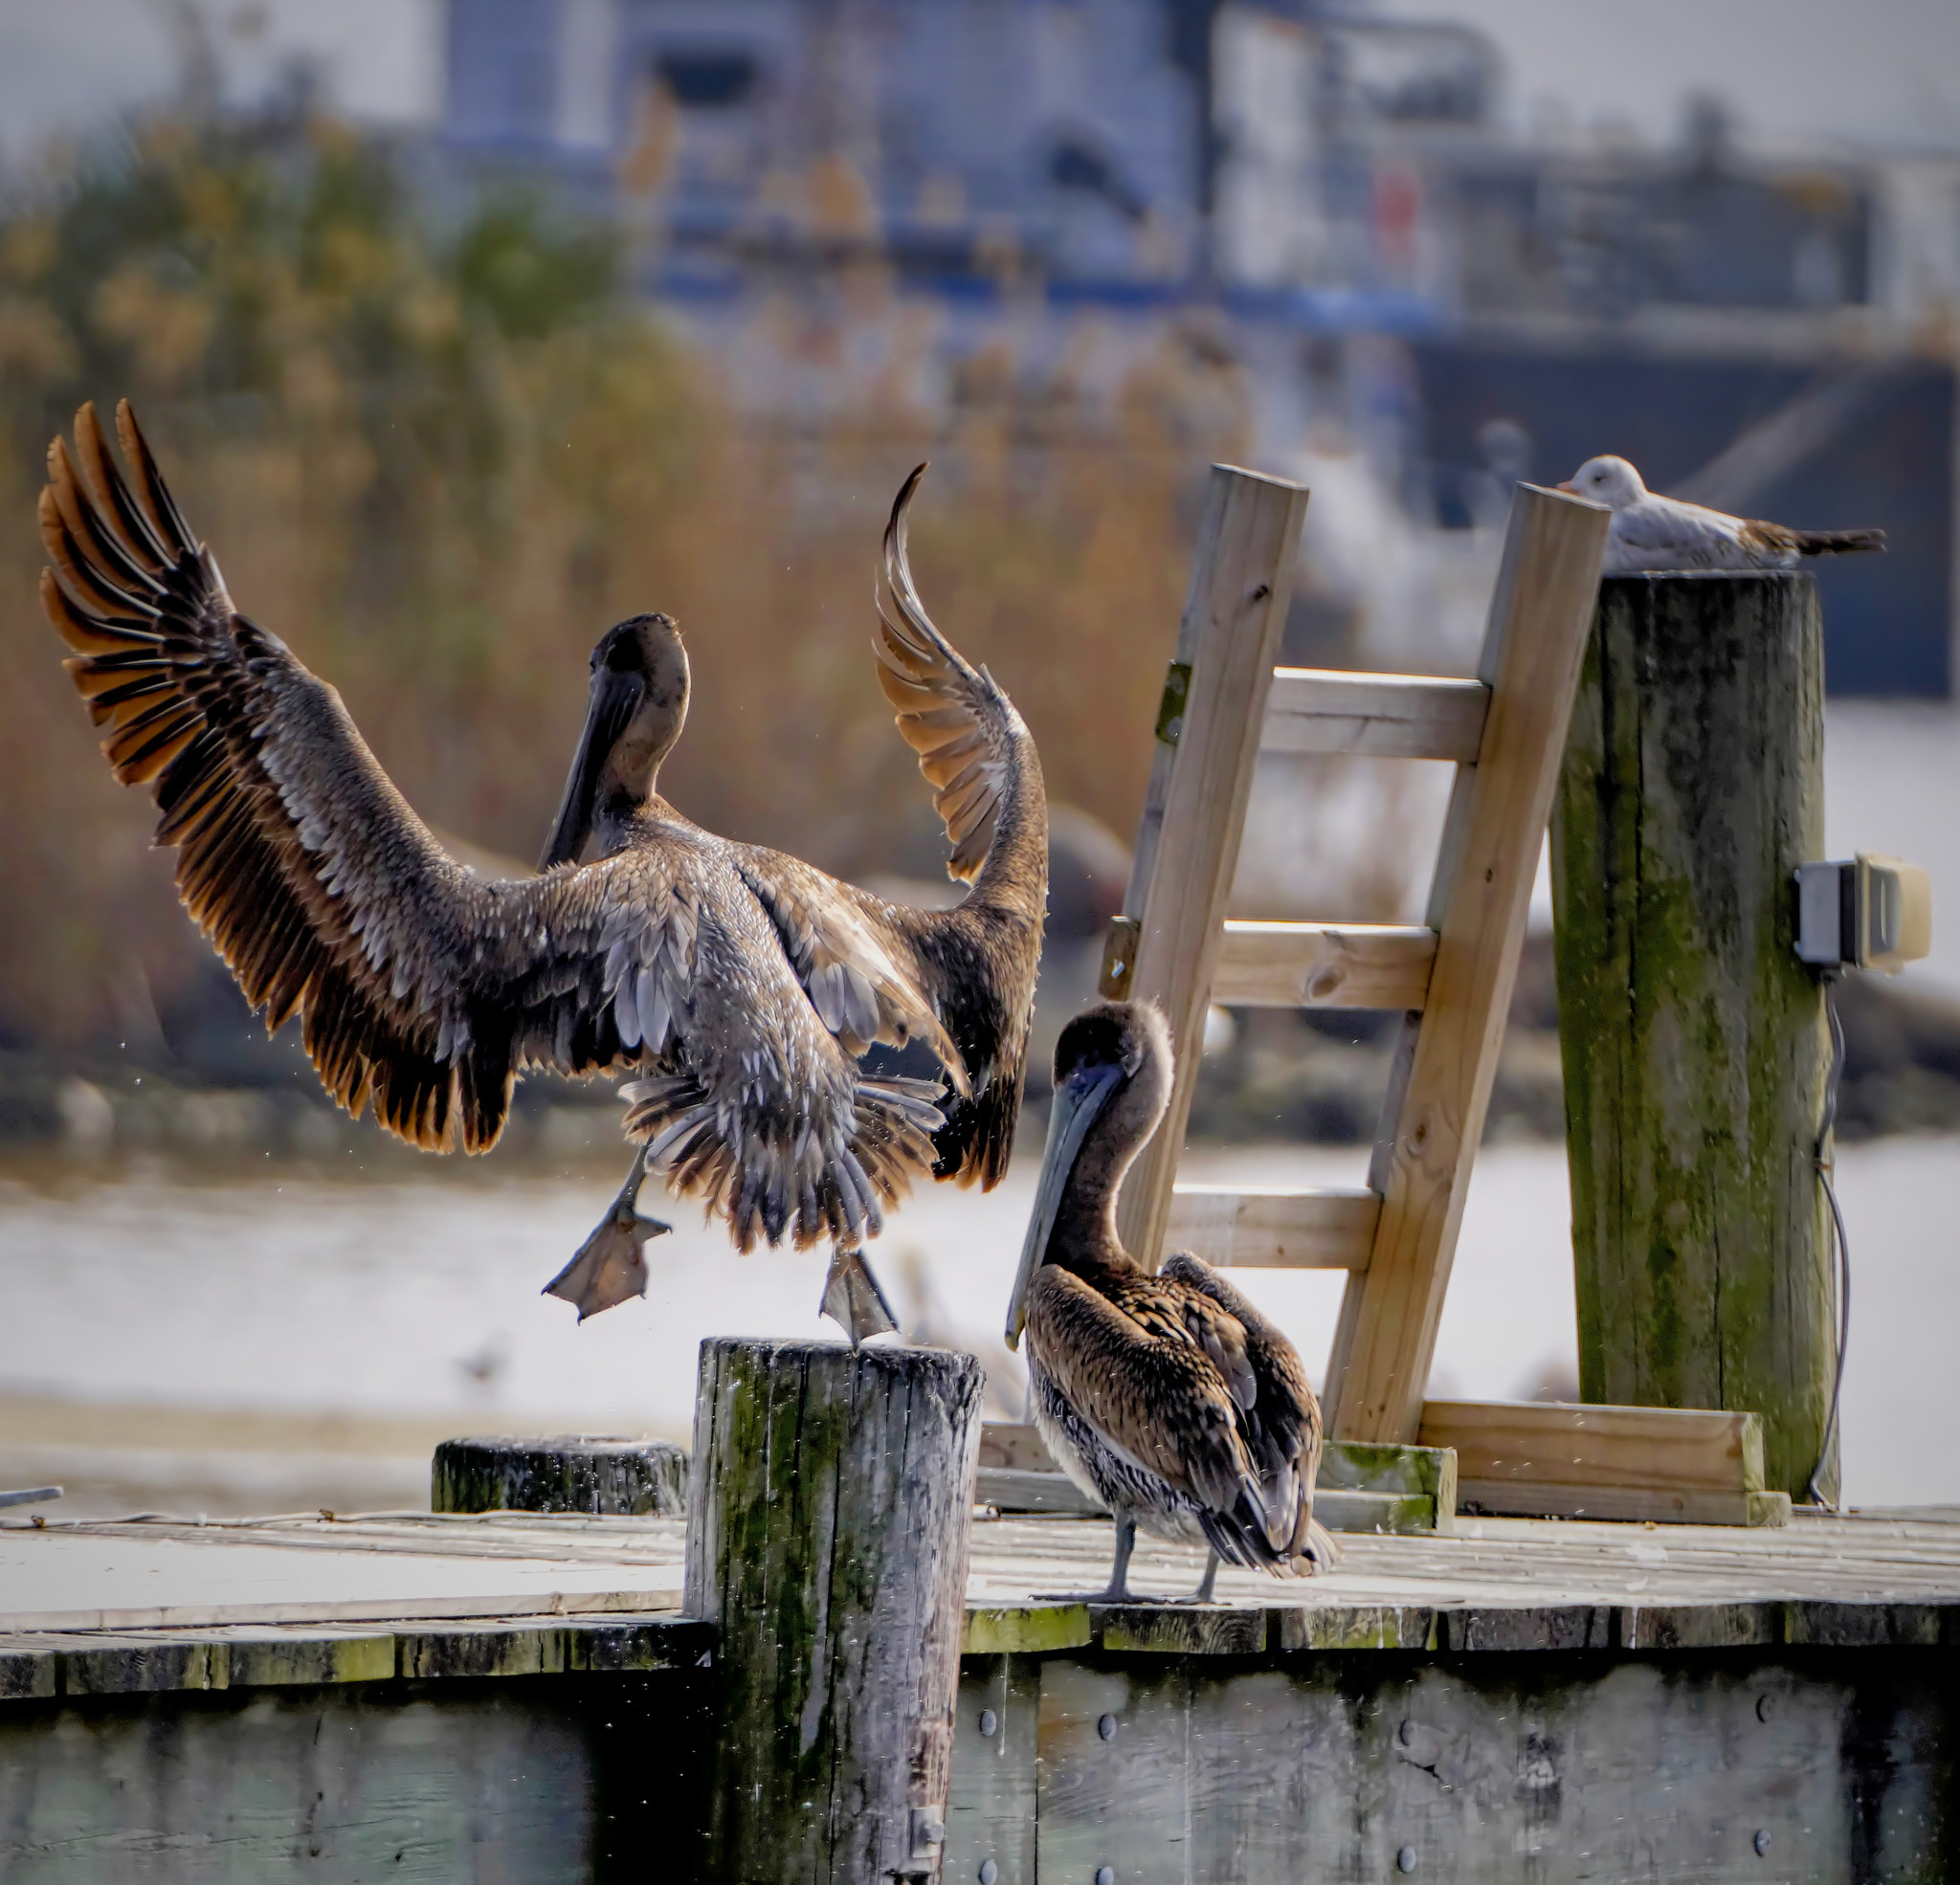 Sony a6300 sample photo. Dancing pelican photography